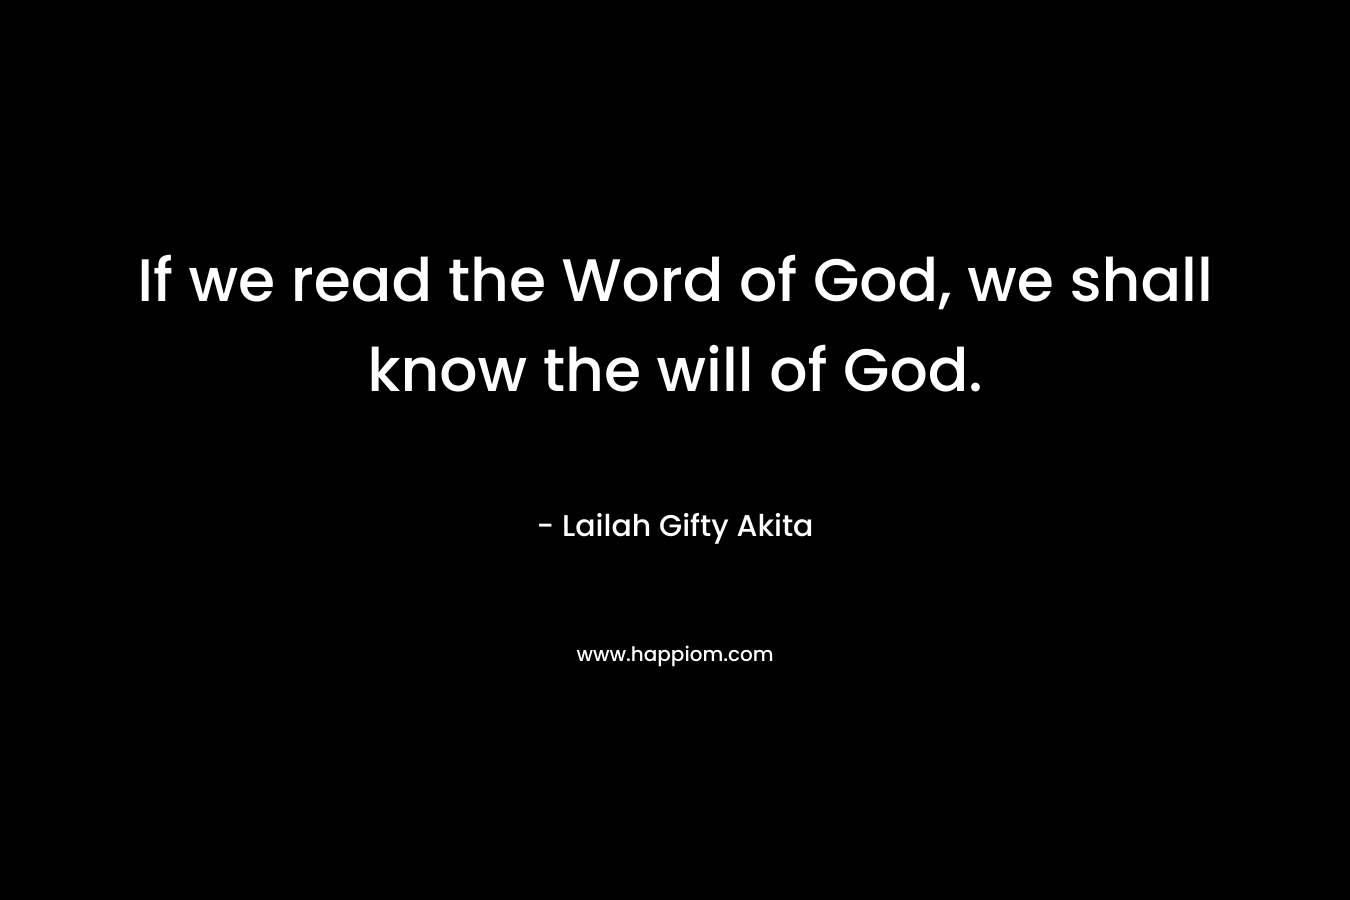 If we read the Word of God, we shall know the will of God.